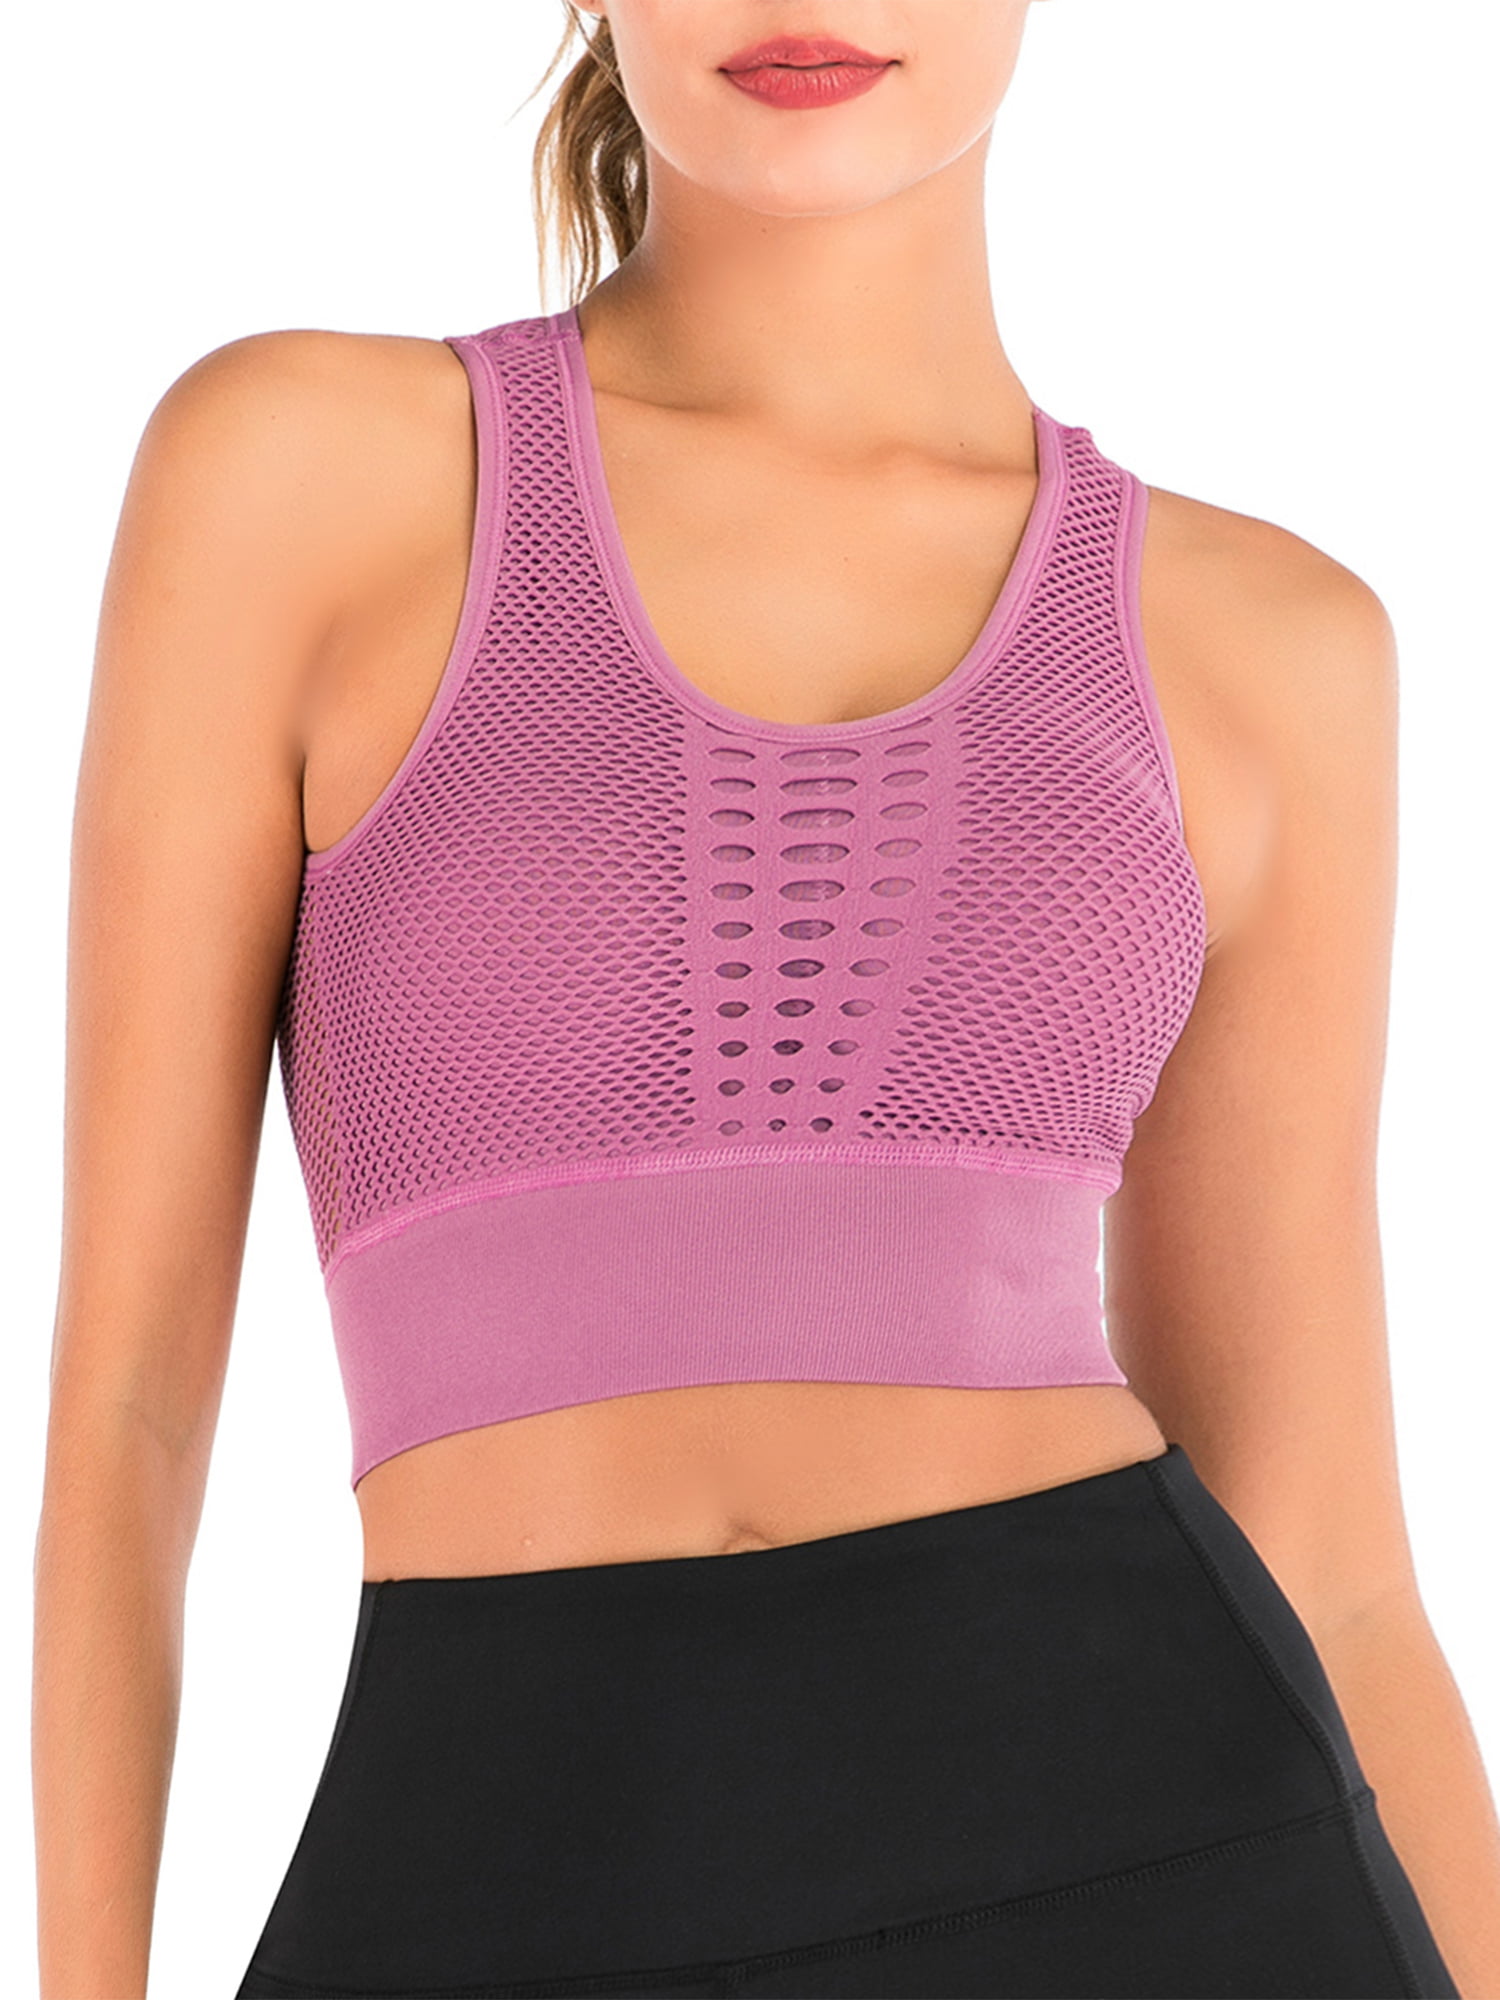 Sayfut Womens Sexy Hollow Racerback High Impact Support Sports Bras